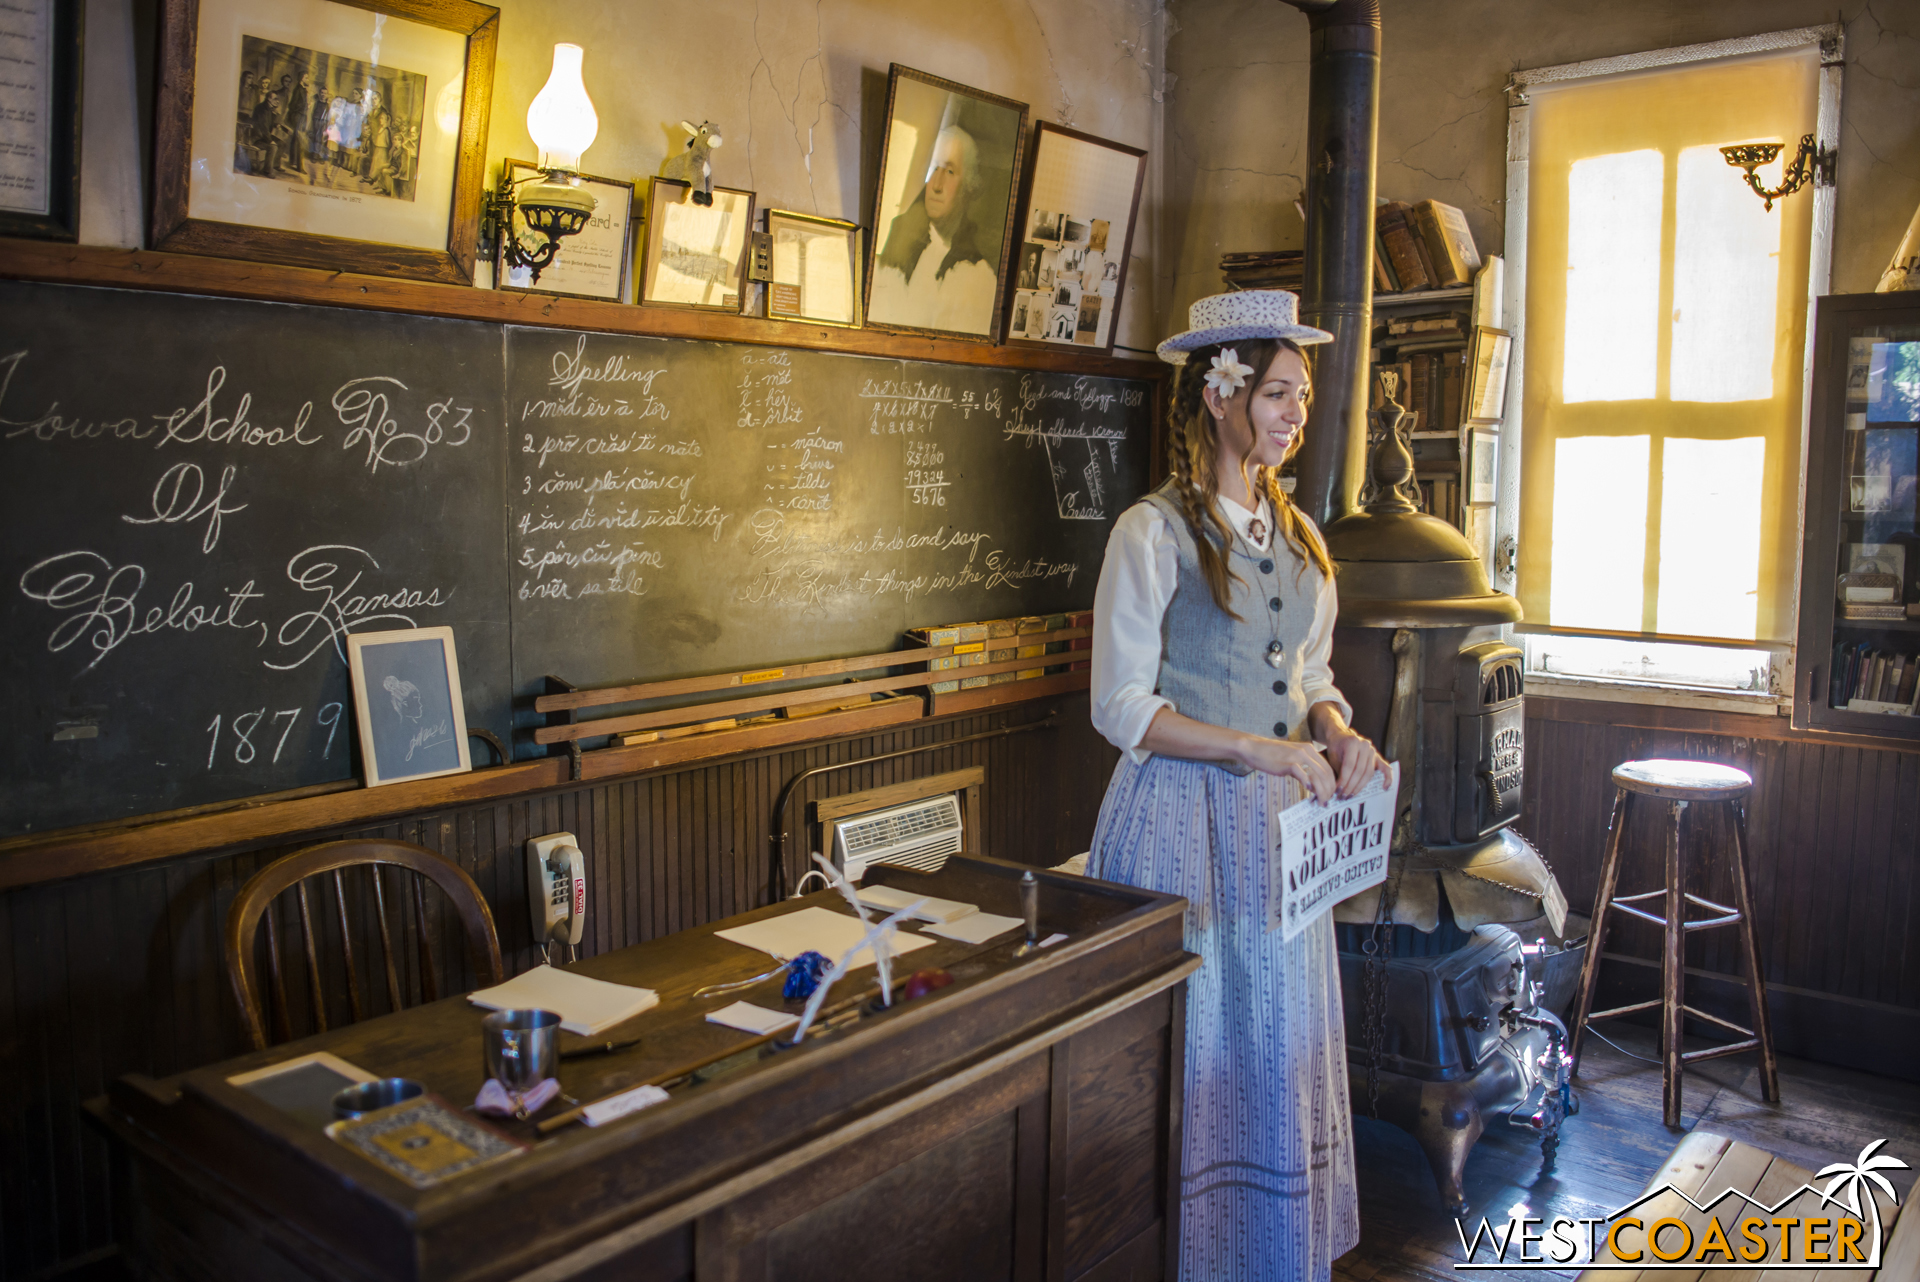  Just as a teacher would in the 1800s, Miss Sierra actually gives teaching lessons inside the Schoolhouse. 